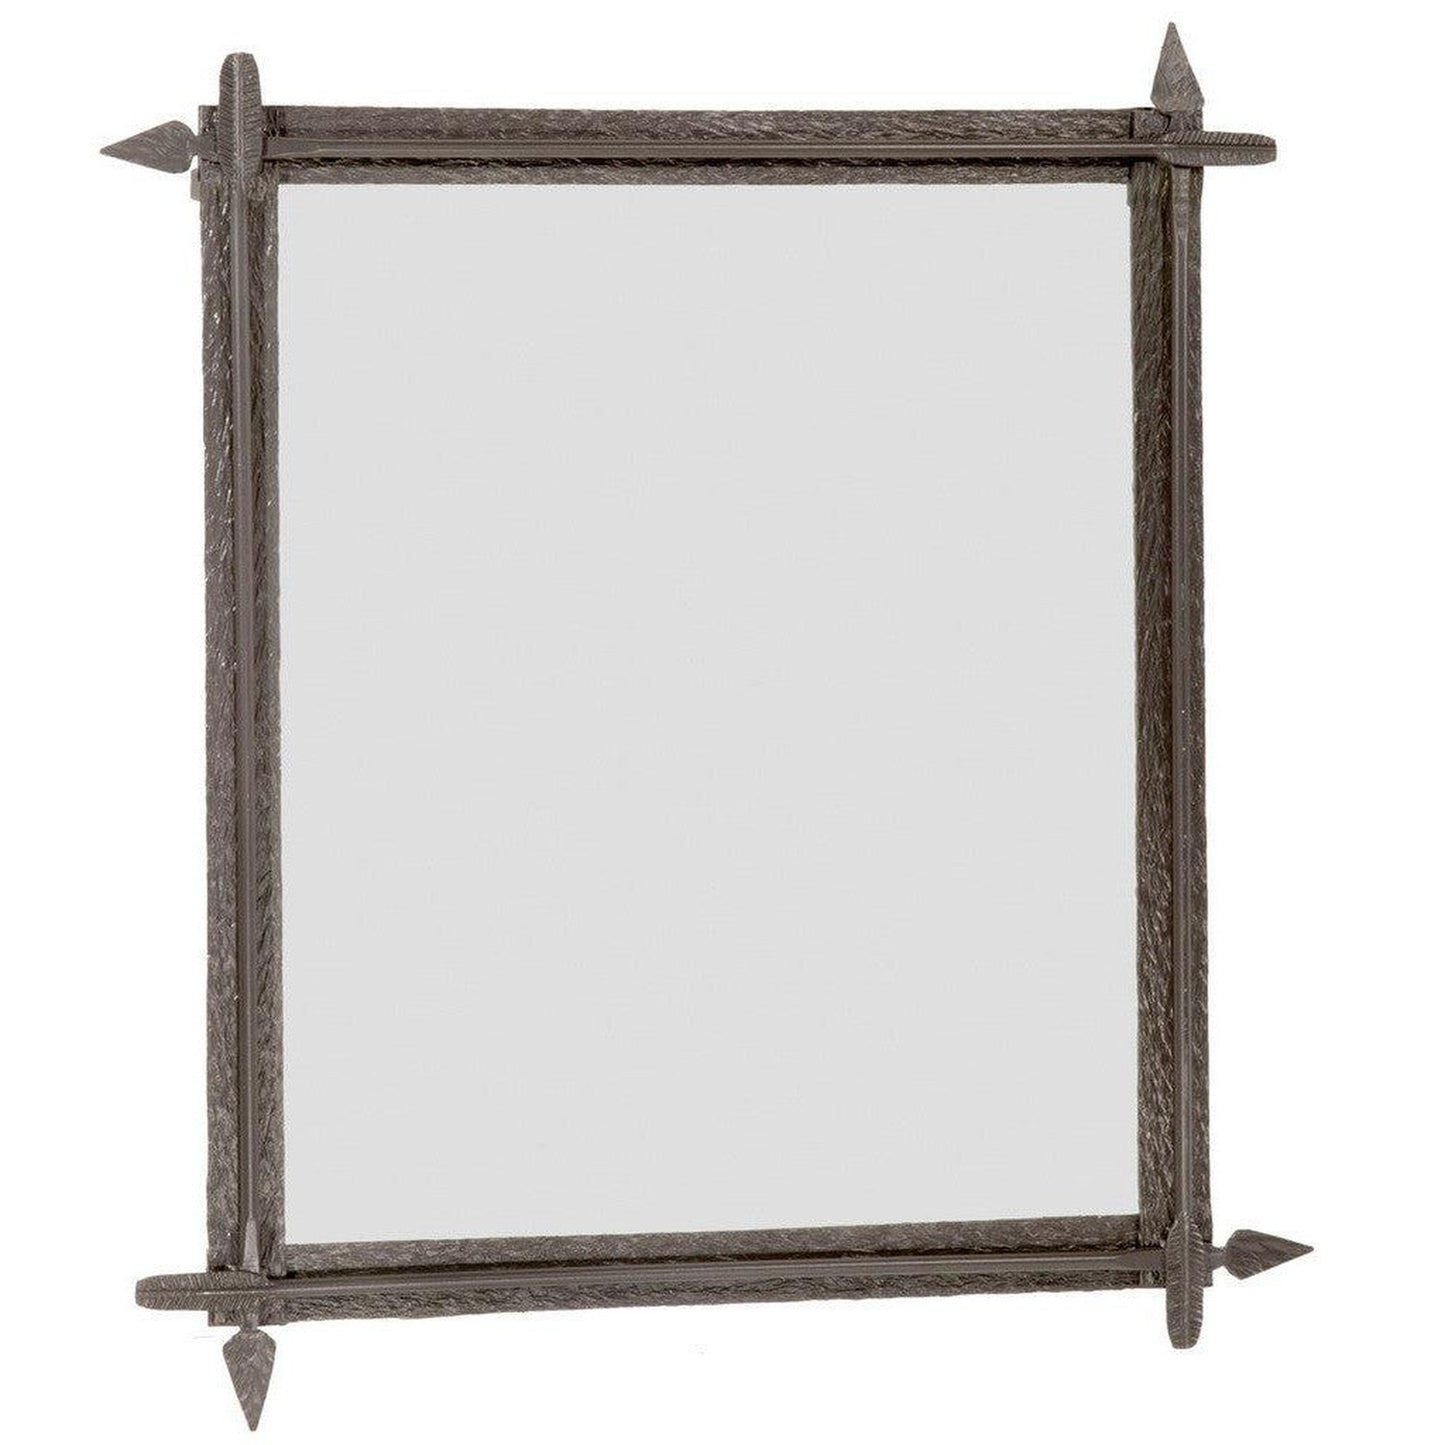 Stone County Ironworks Quapaw 28" x 32" Small Satin Black Iron Wall Mirror With Copper Iron Accent